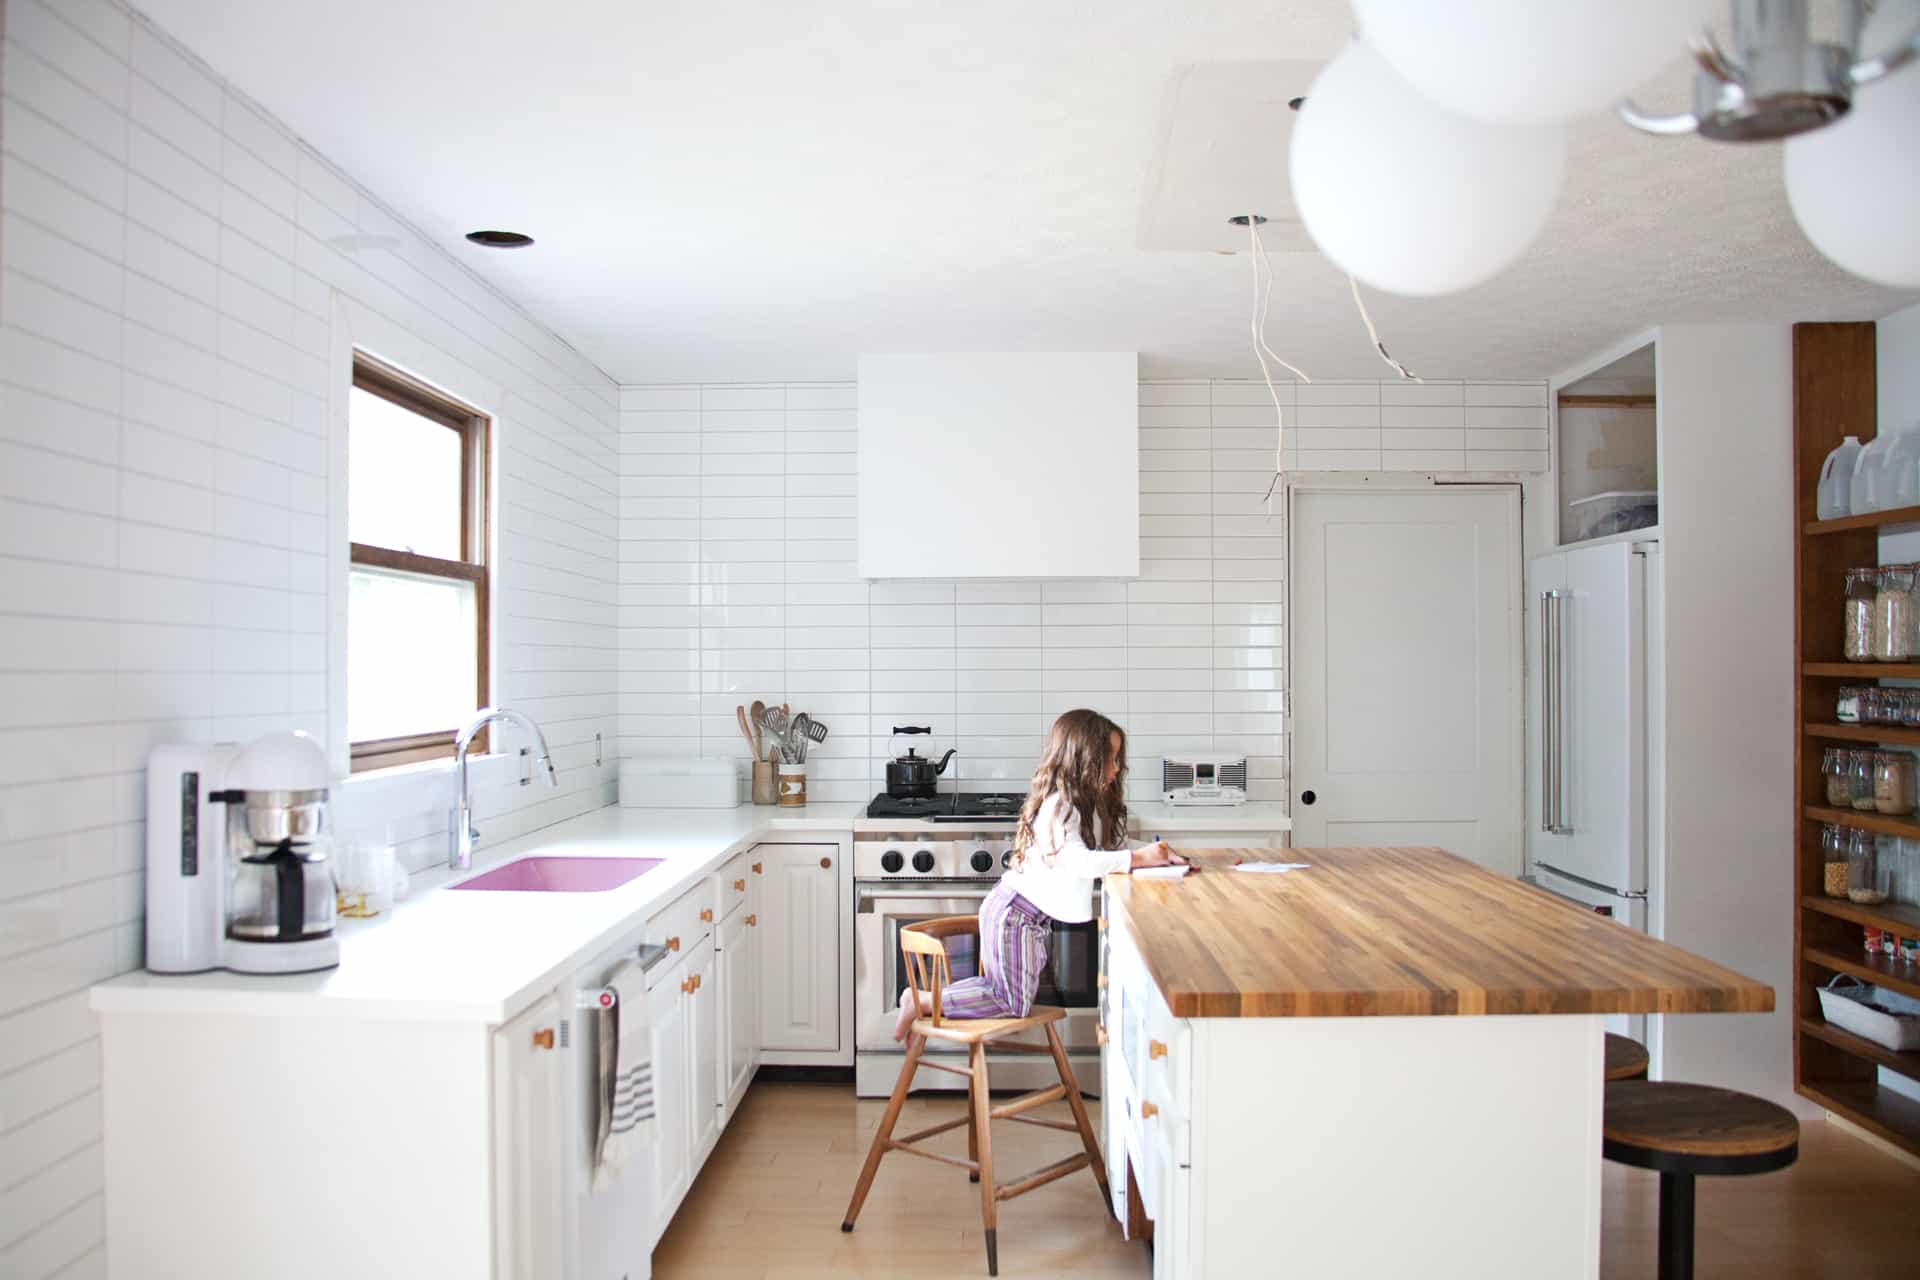 The pros and cons of remodeling your kitchen